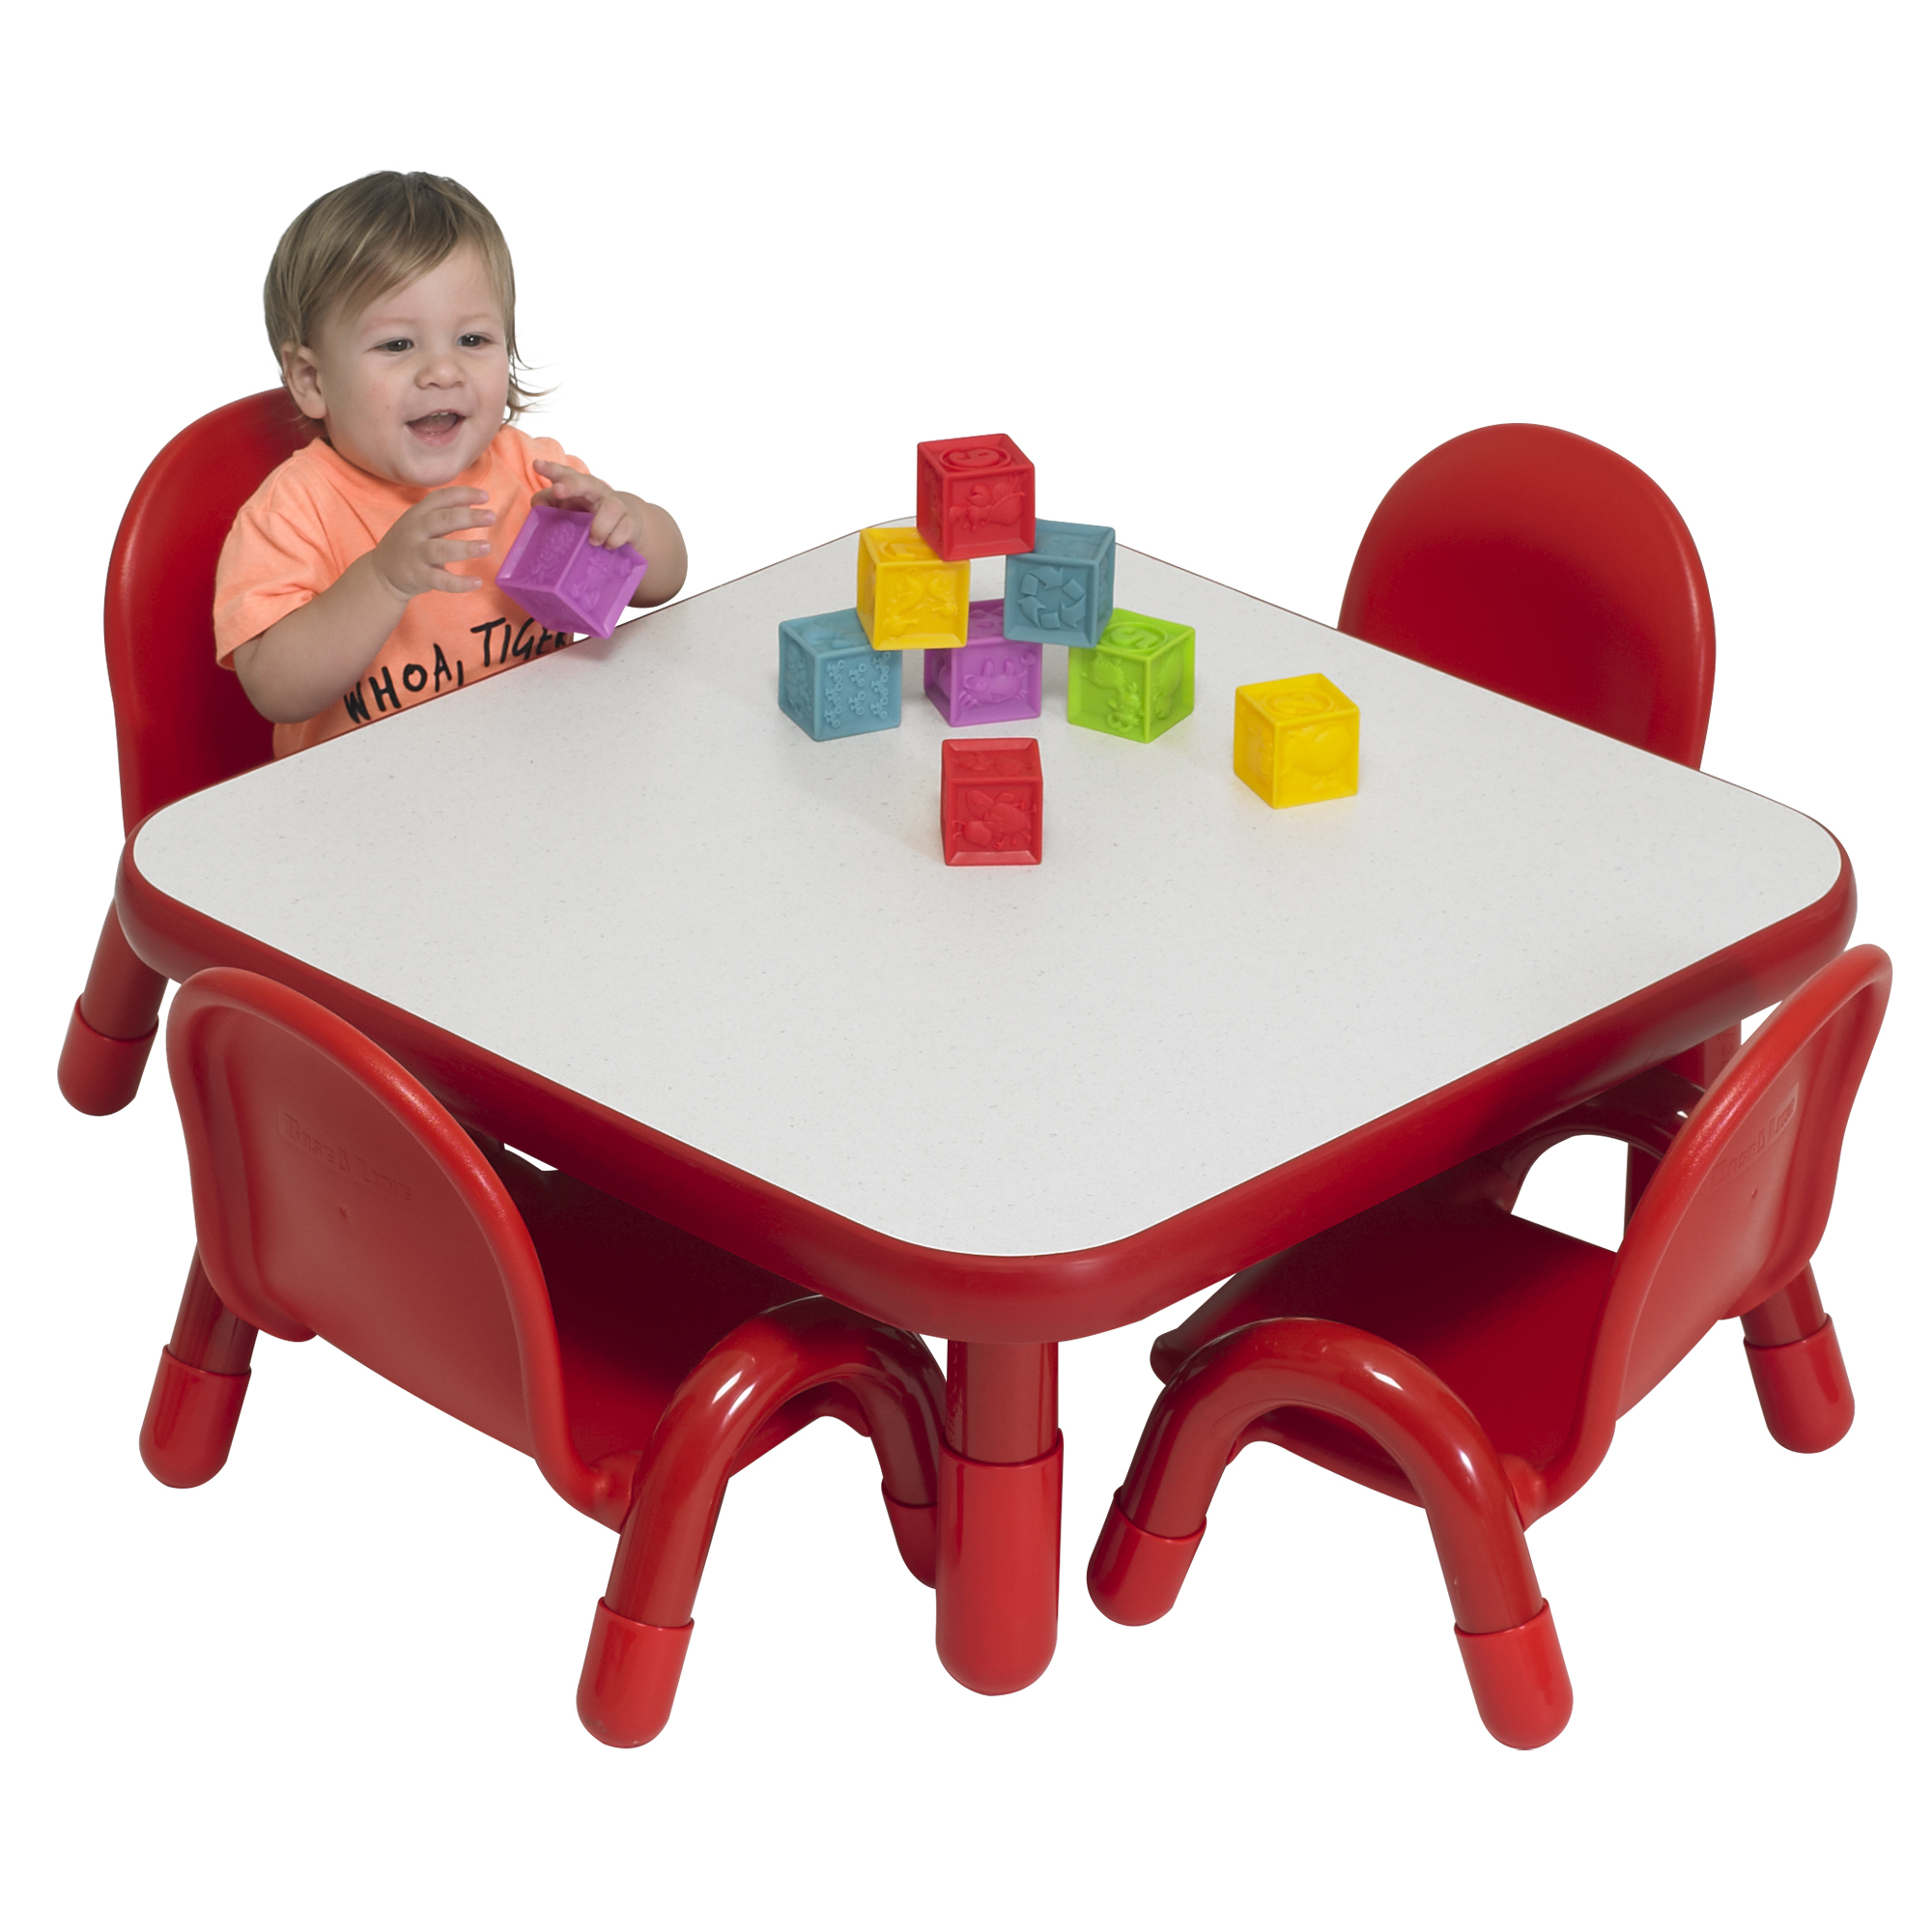 BaseLine® Toddler 76 cm  Square Table & Chair Set - Solid Candy Apple Red